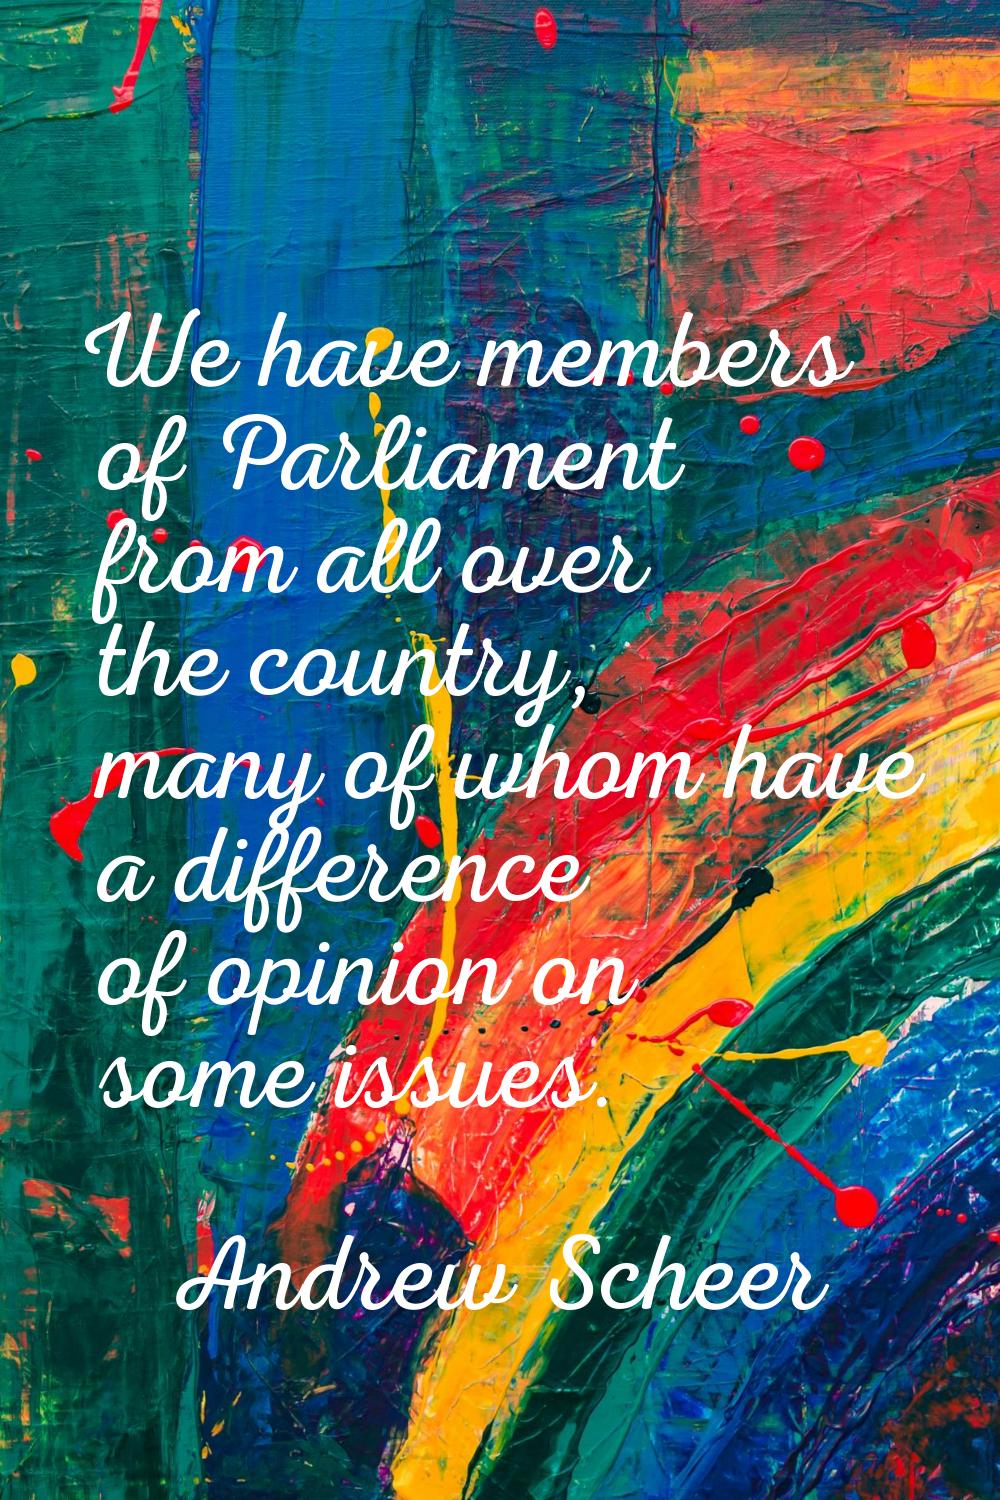 We have members of Parliament from all over the country, many of whom have a difference of opinion 